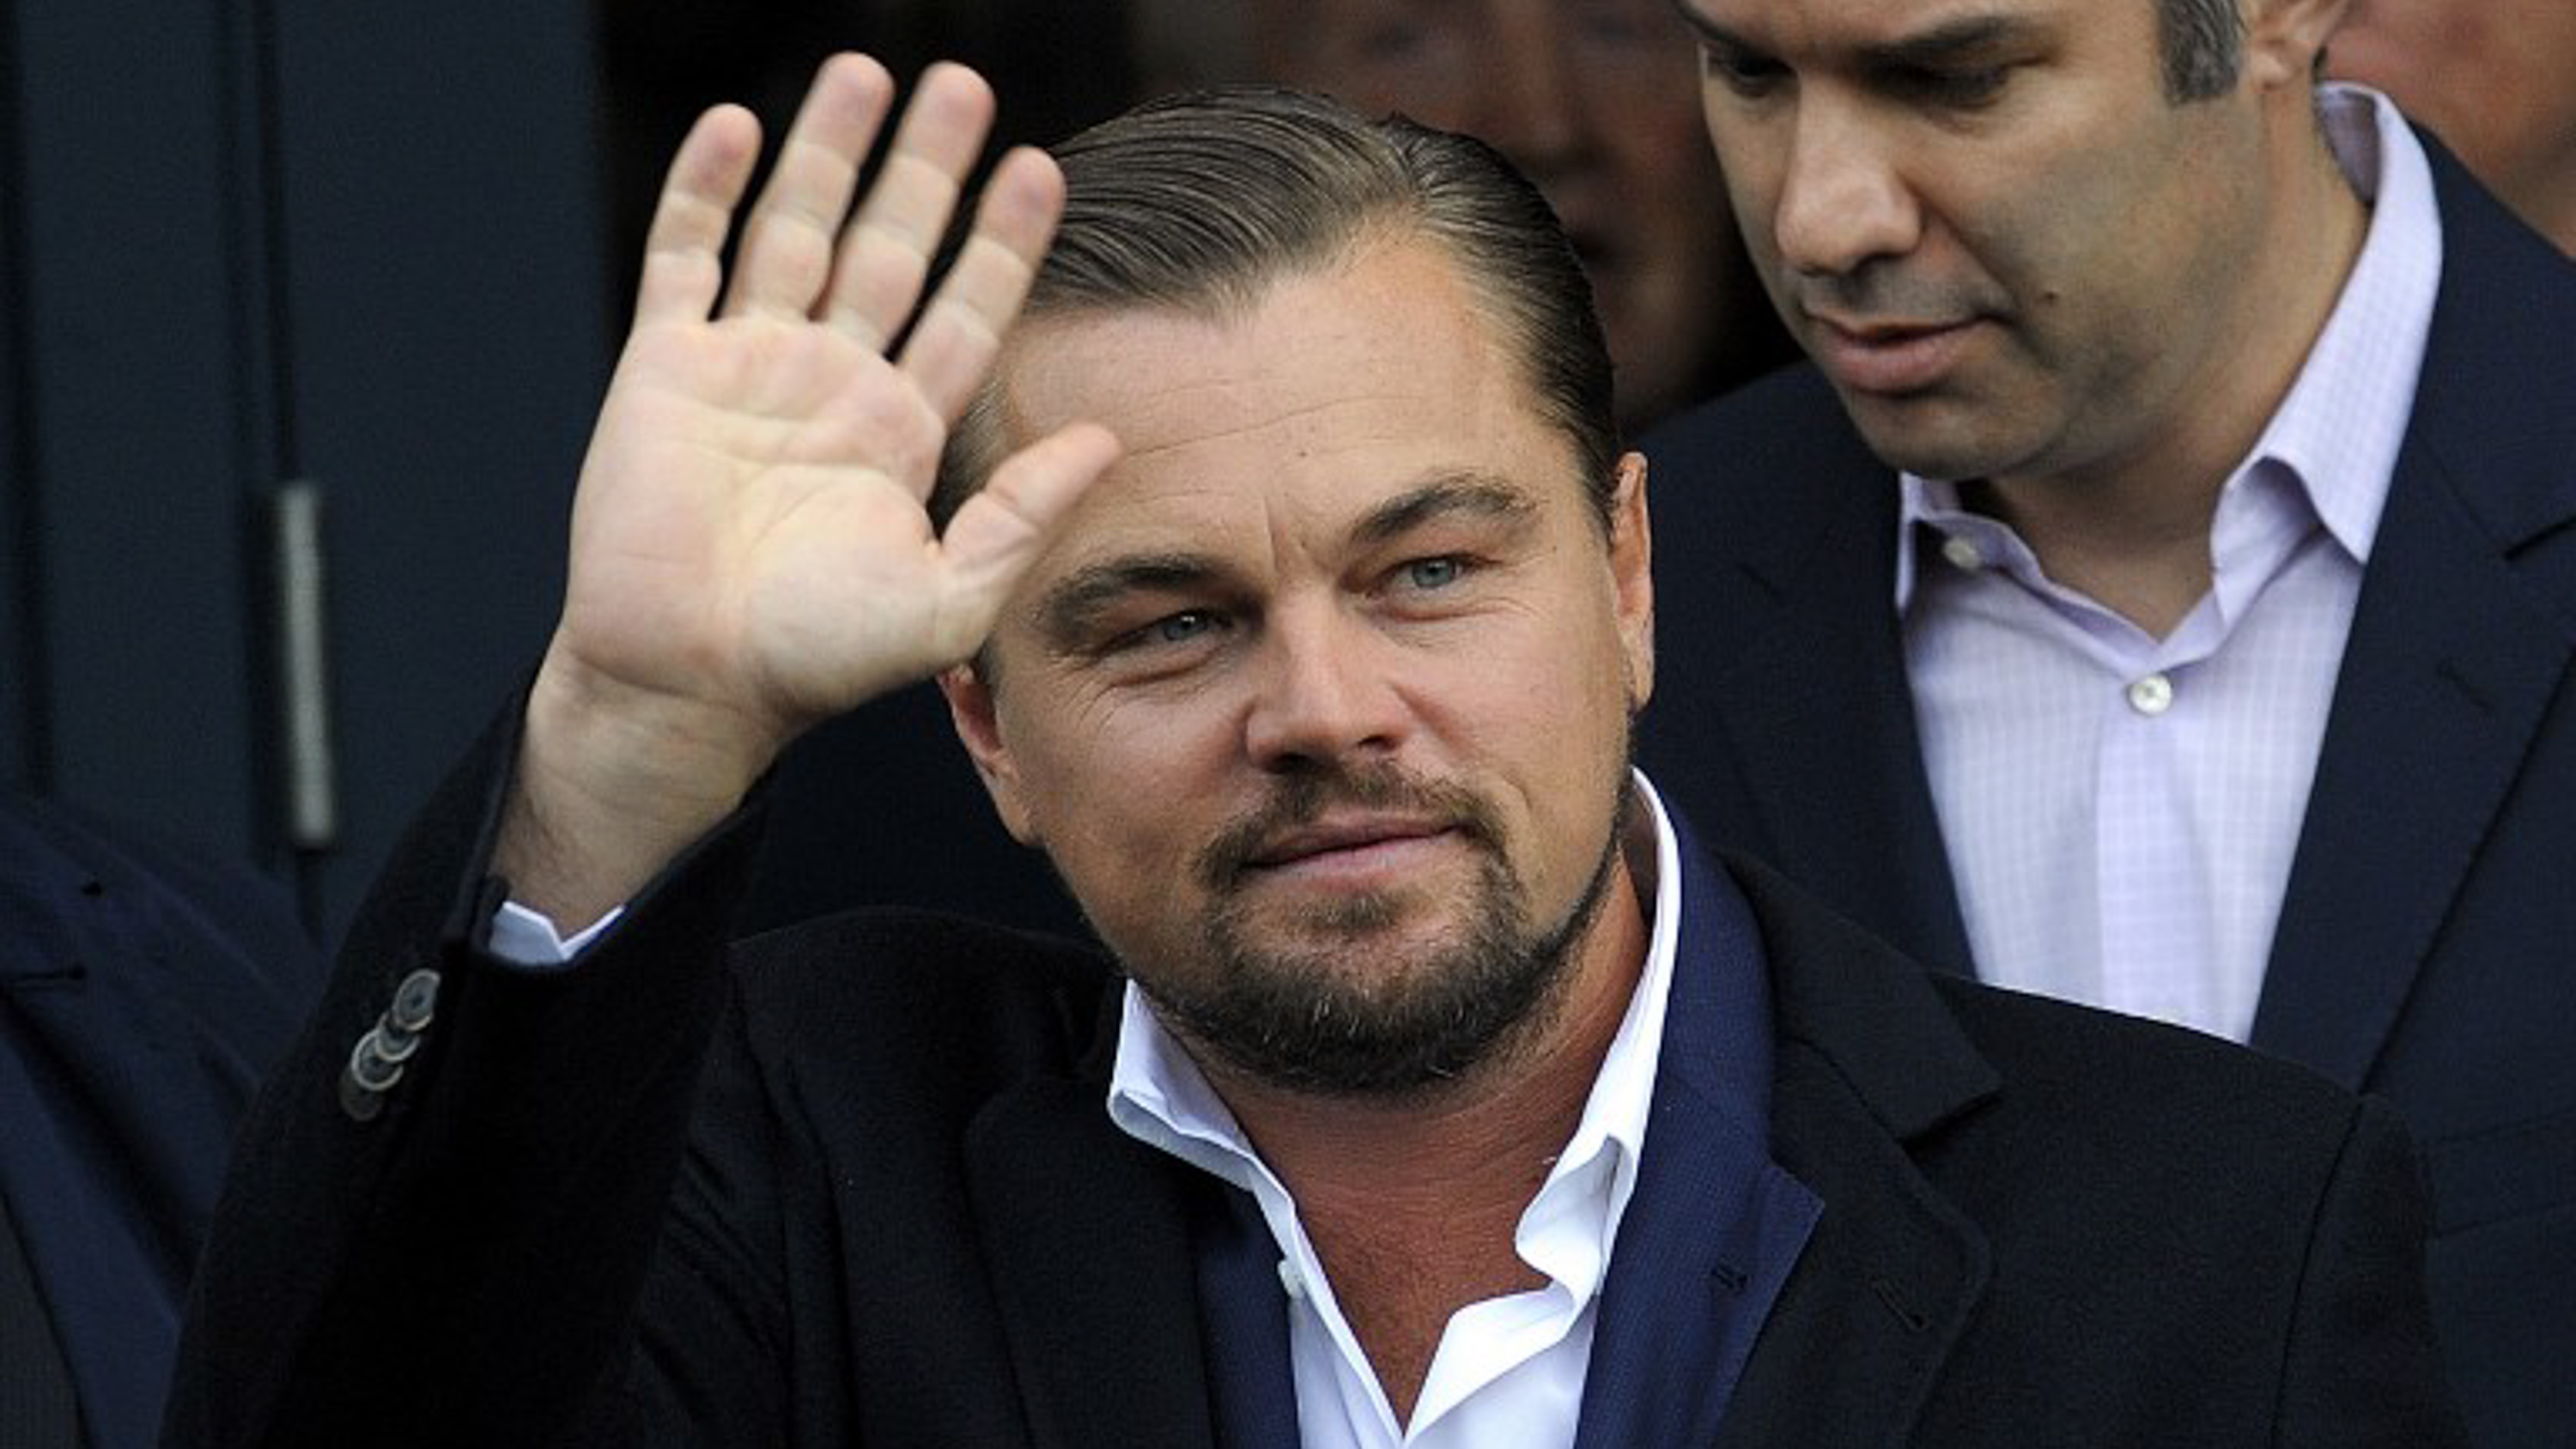 LEONARDO DICAPRIO. Leonardo DiCaprio arrives at the social restaurant Home, which aims to help the homeless, in Edinburgh, Scotland ahead of his appearance at the Scottish Business Awards. Photo by Andy Buchanan/AFP Photo 